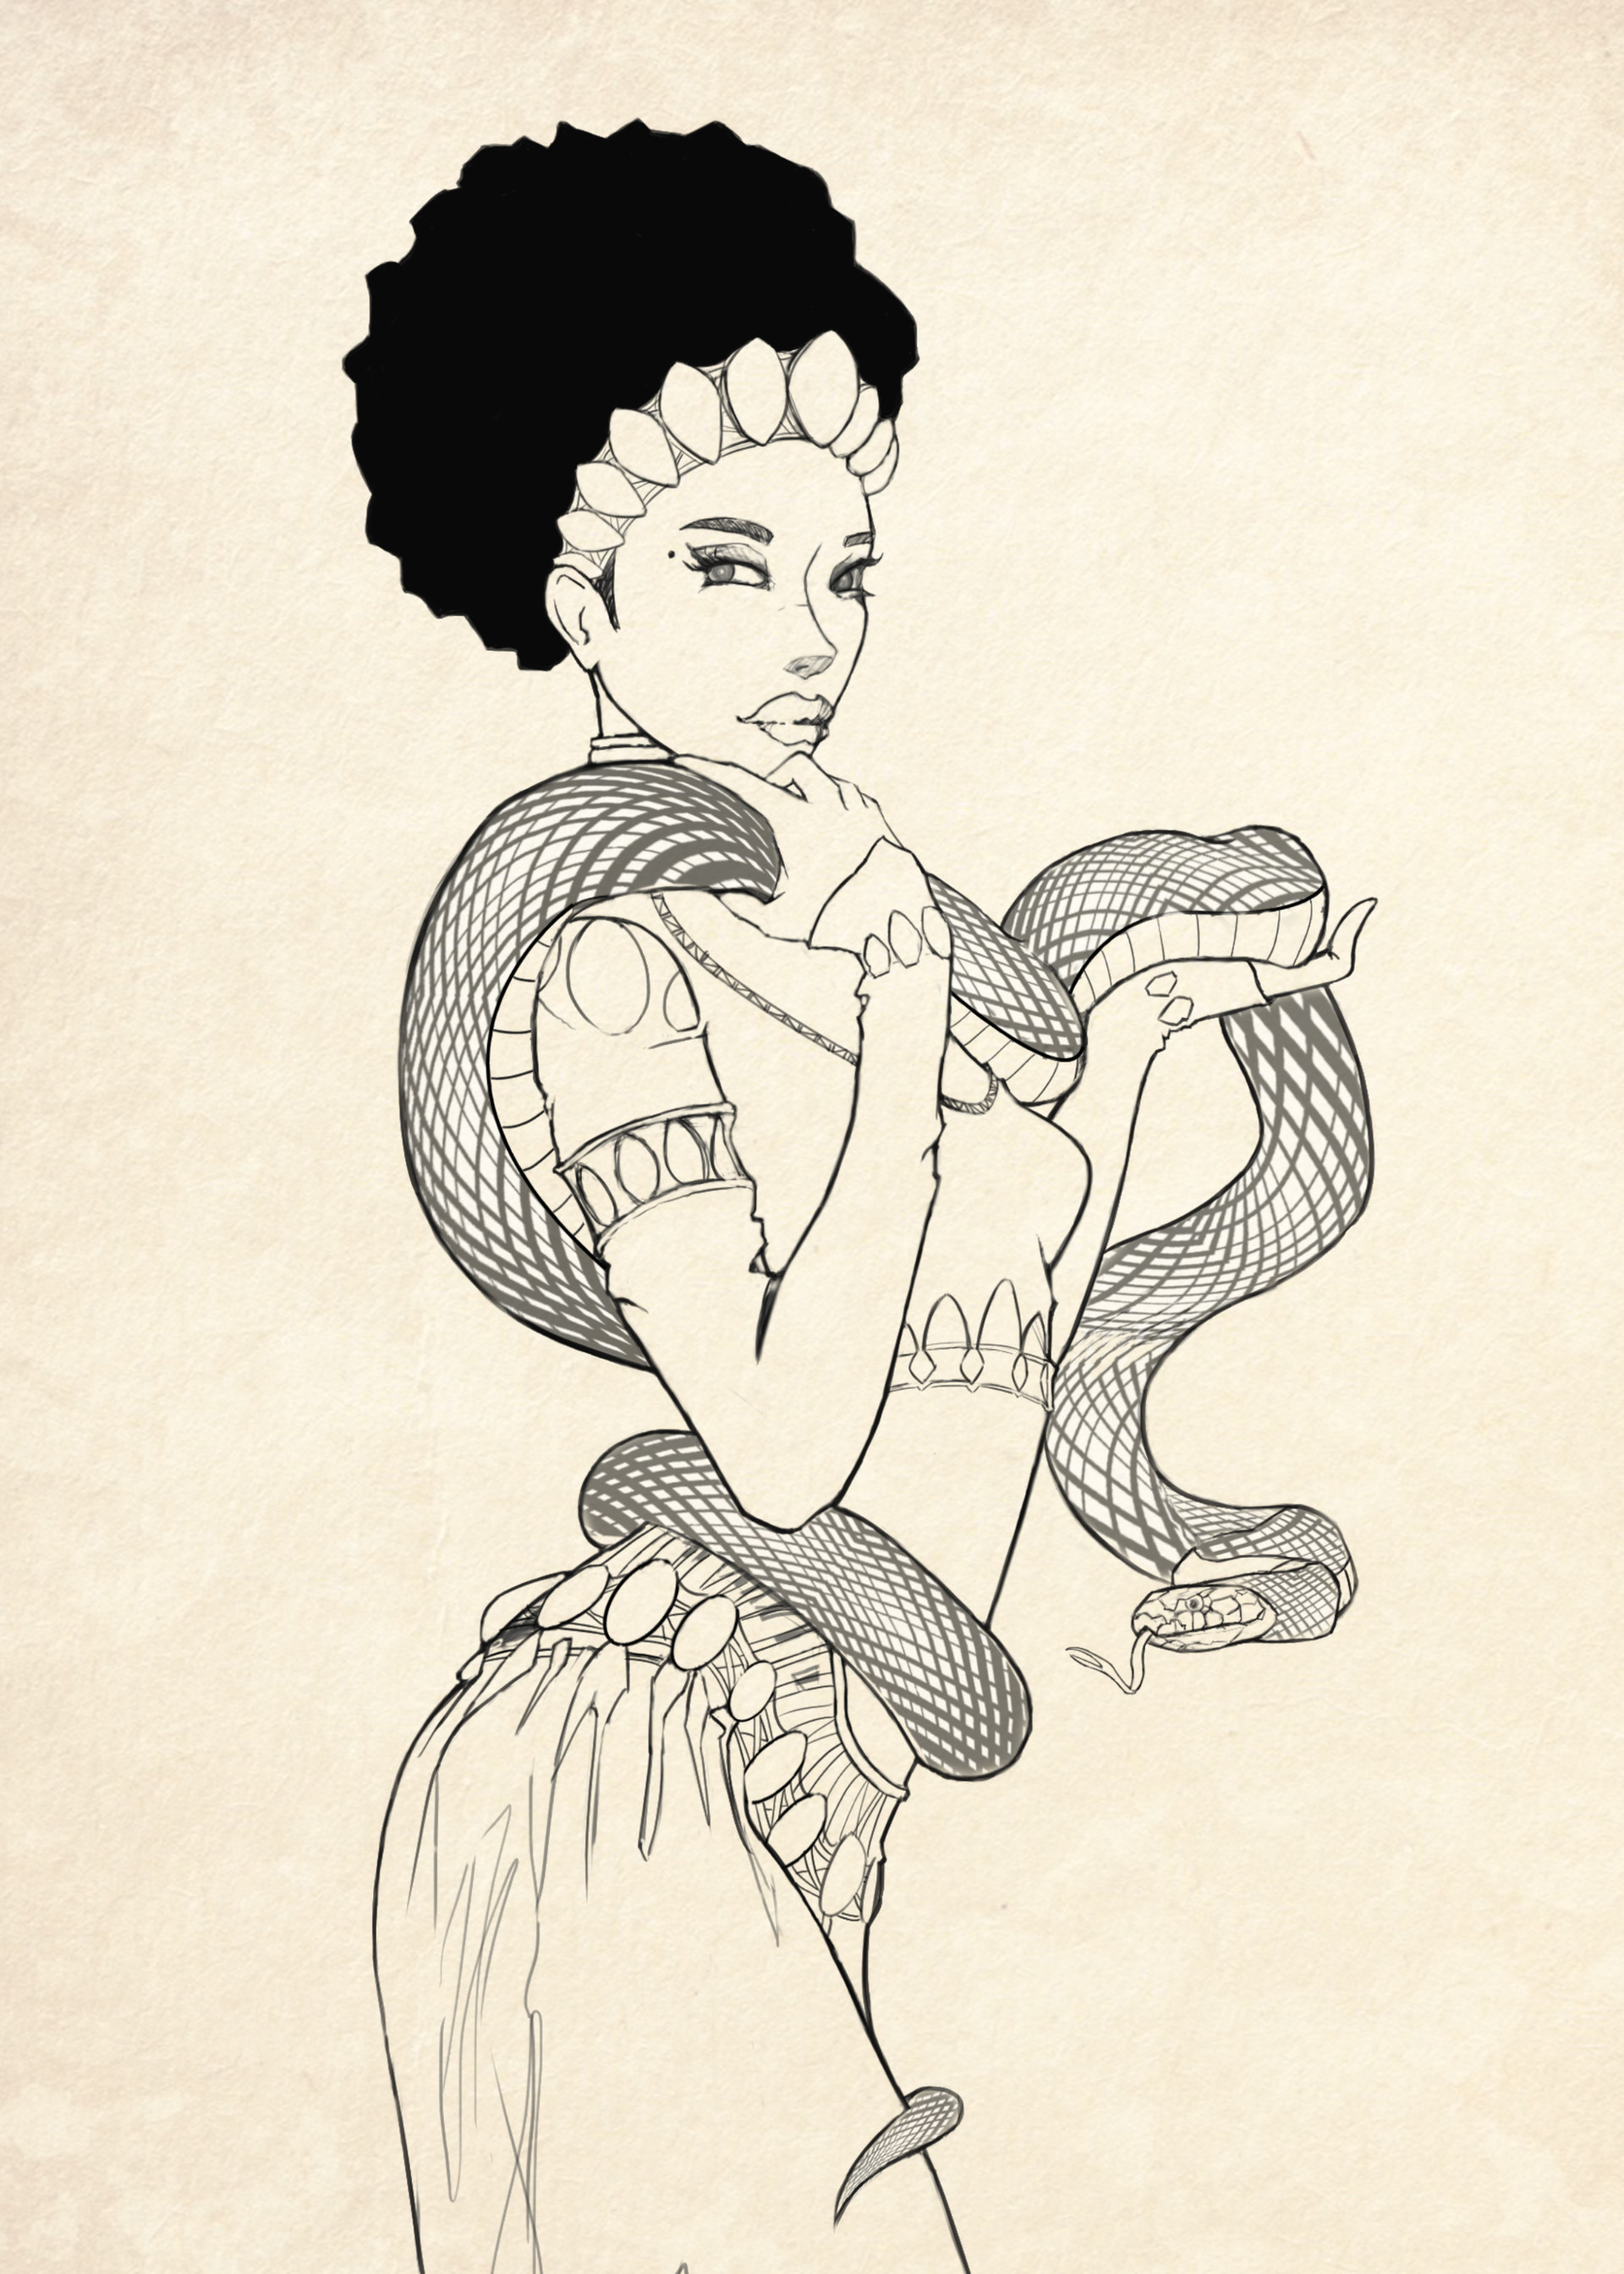 Printable Coloring Sheet of Snake Charmer from India – Naptown Press